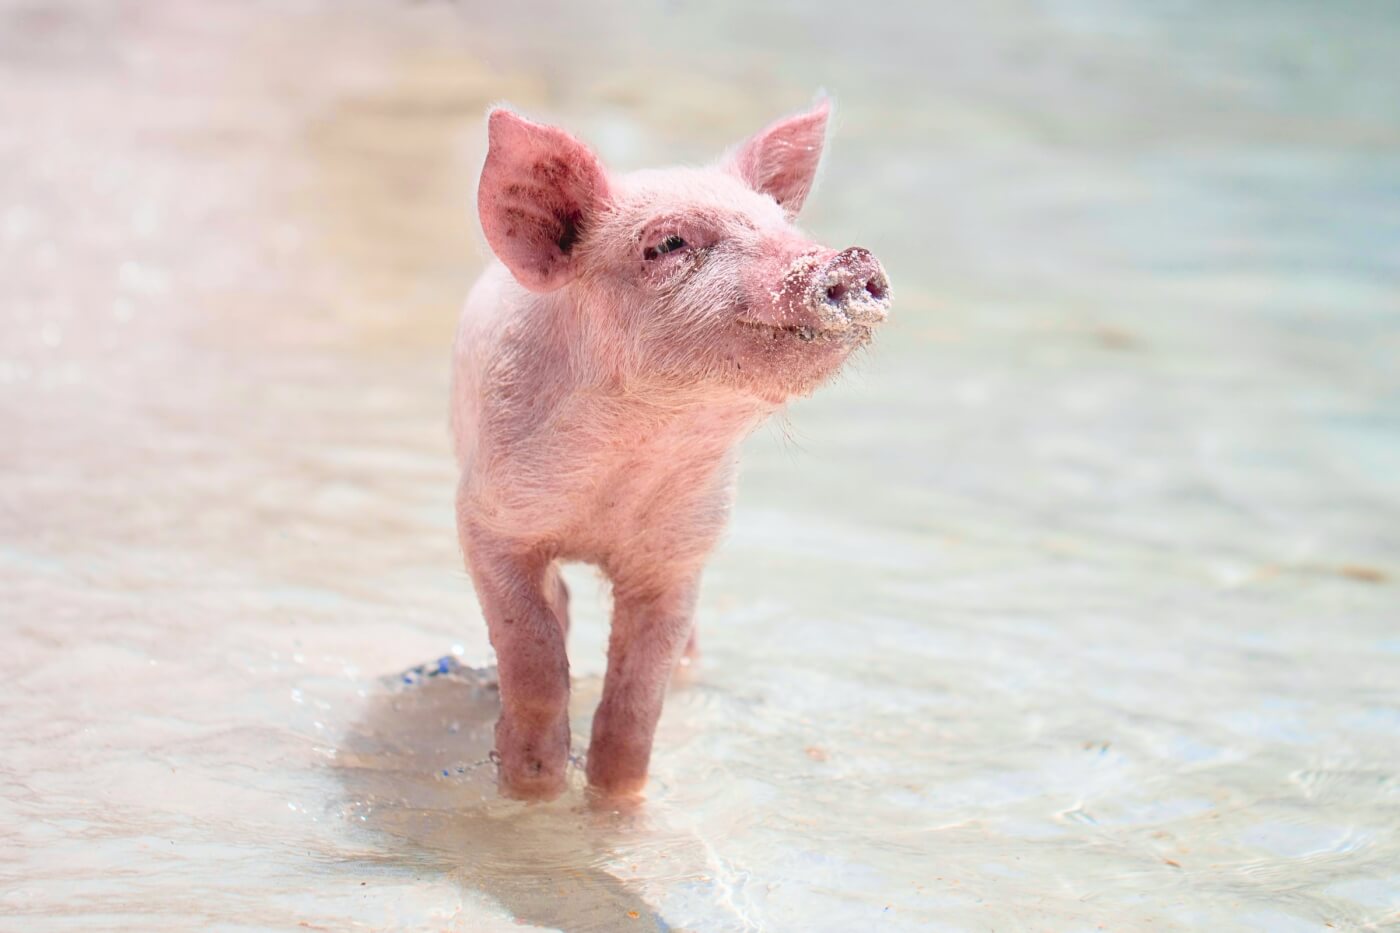 A pink piglet steps in shallow water on the beach